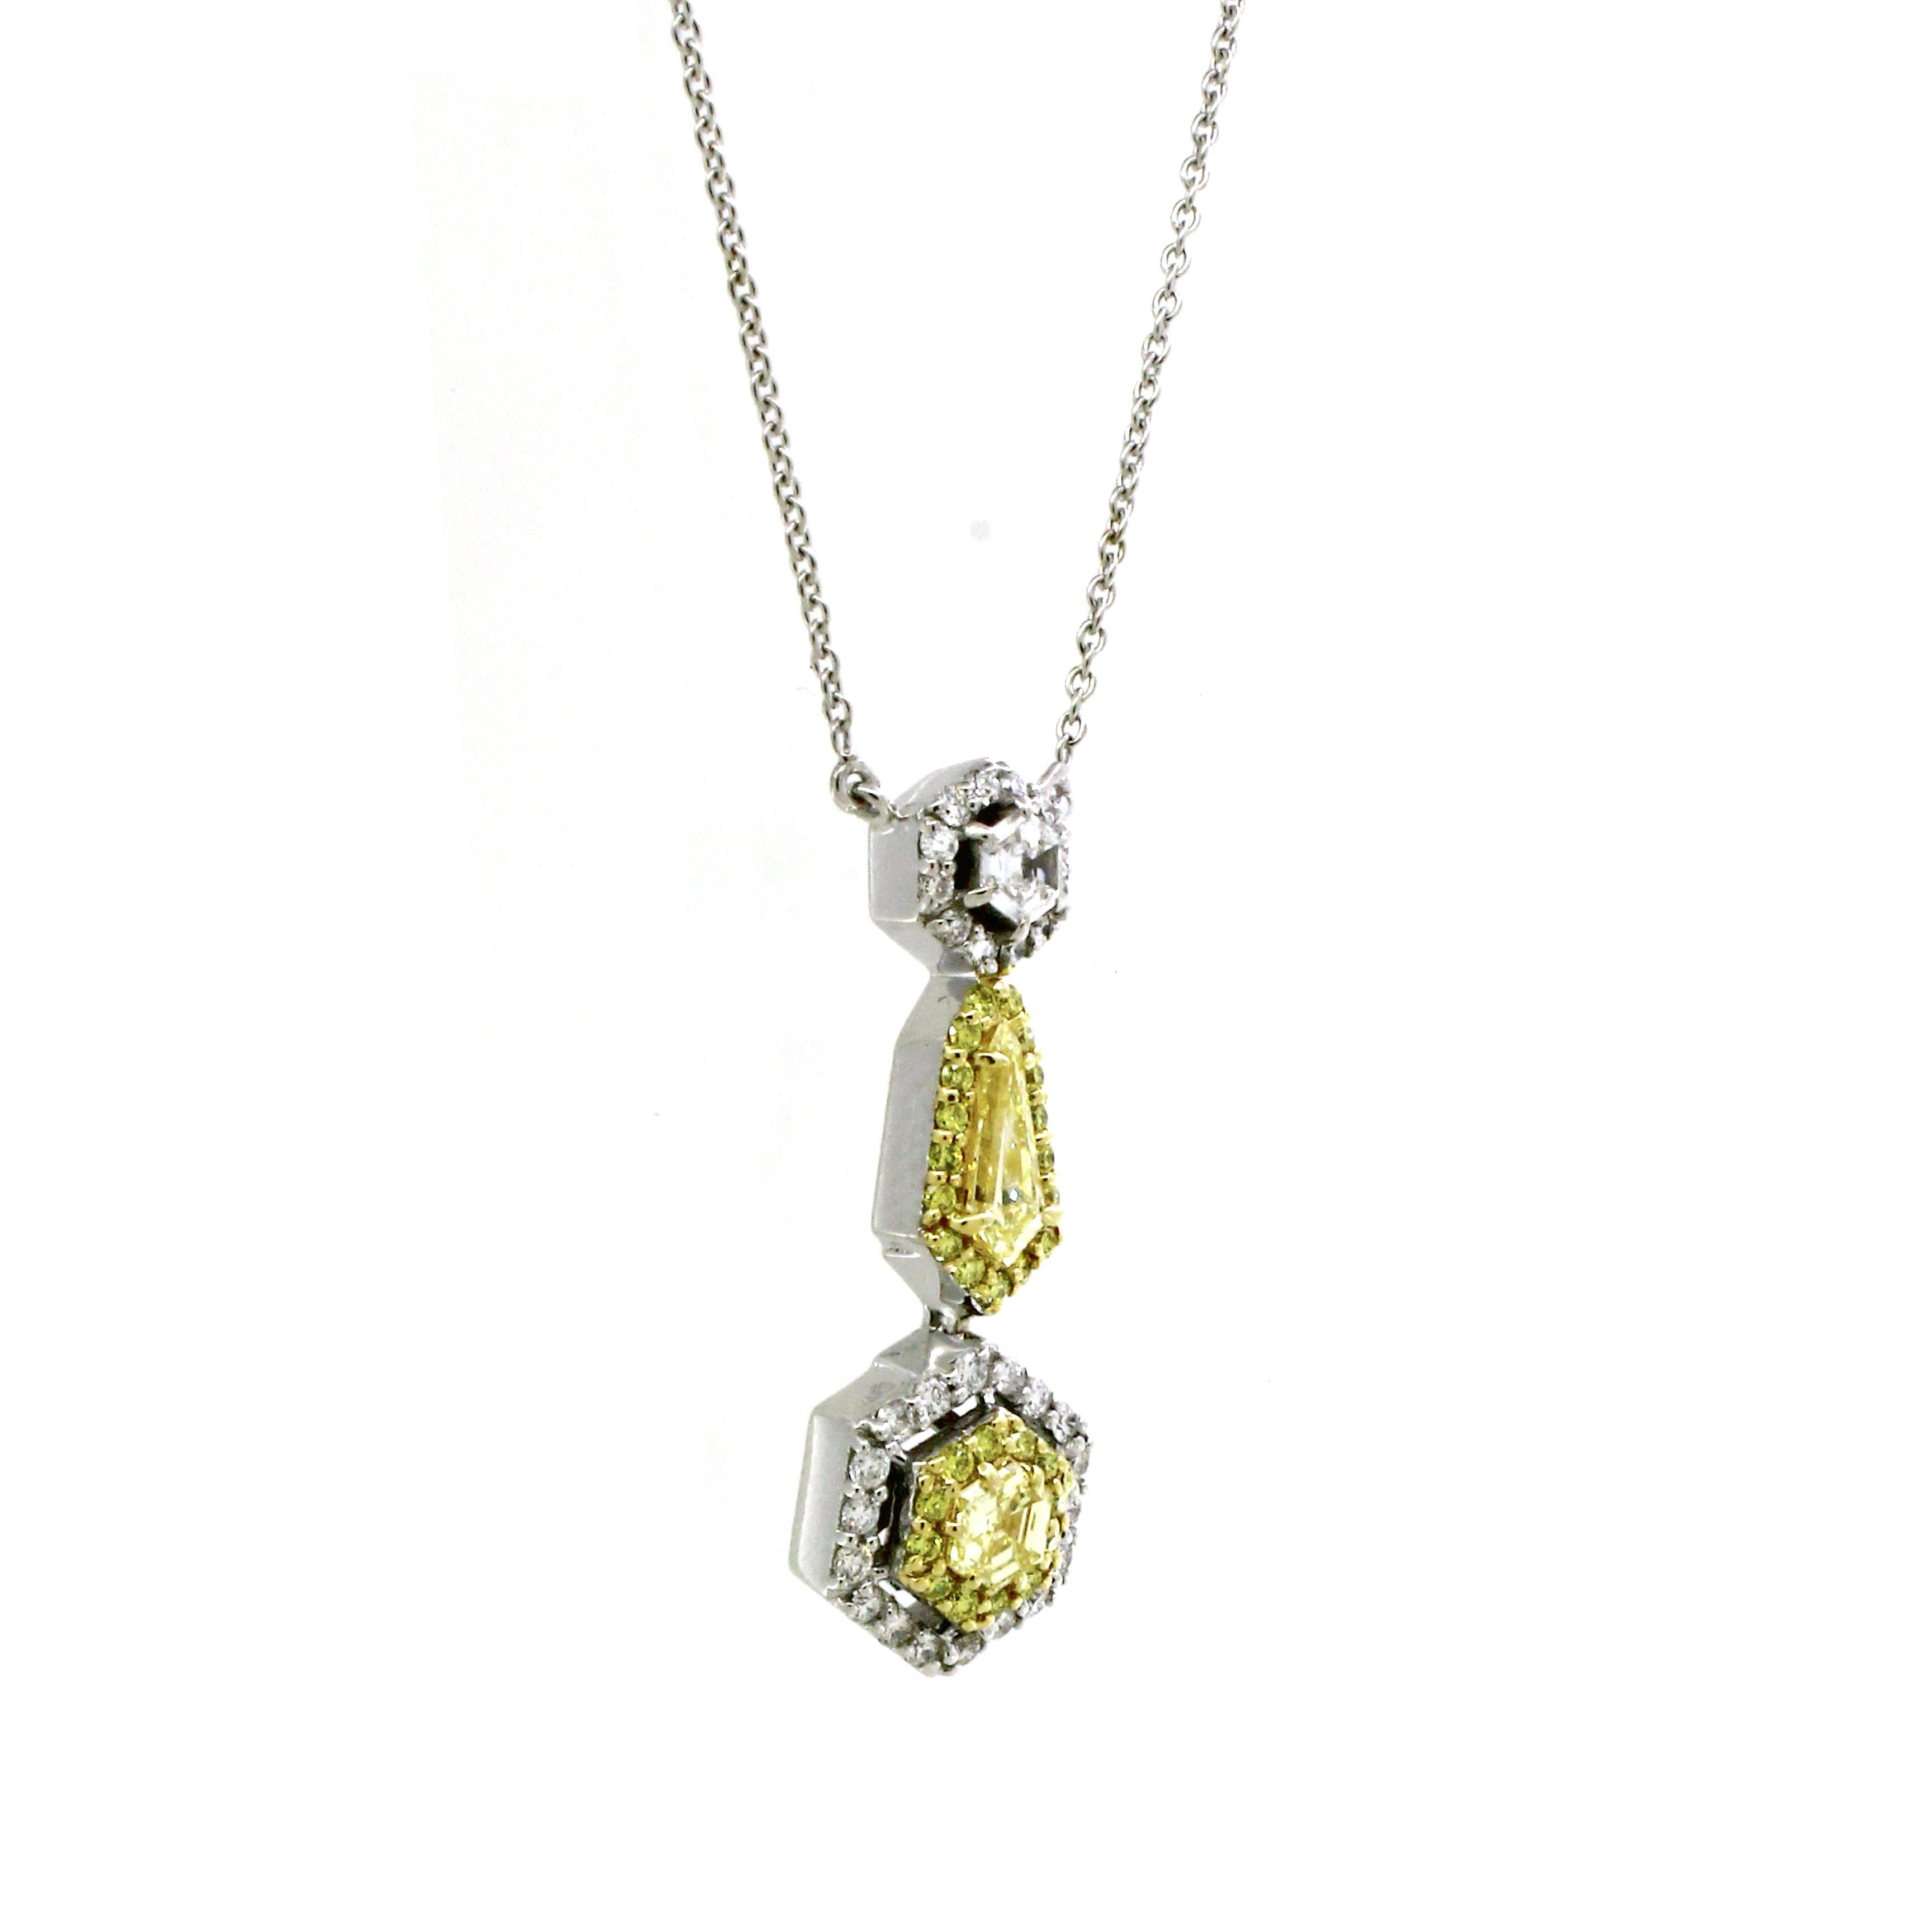 Behold the epitome of luxury and elegance in our extraordinary pendant chain, a dazzling masterpiece that combines the enchanting beauty of fancy yellow diamonds with the timeless allure of white diamonds.
At the center of this pendant, you'll find